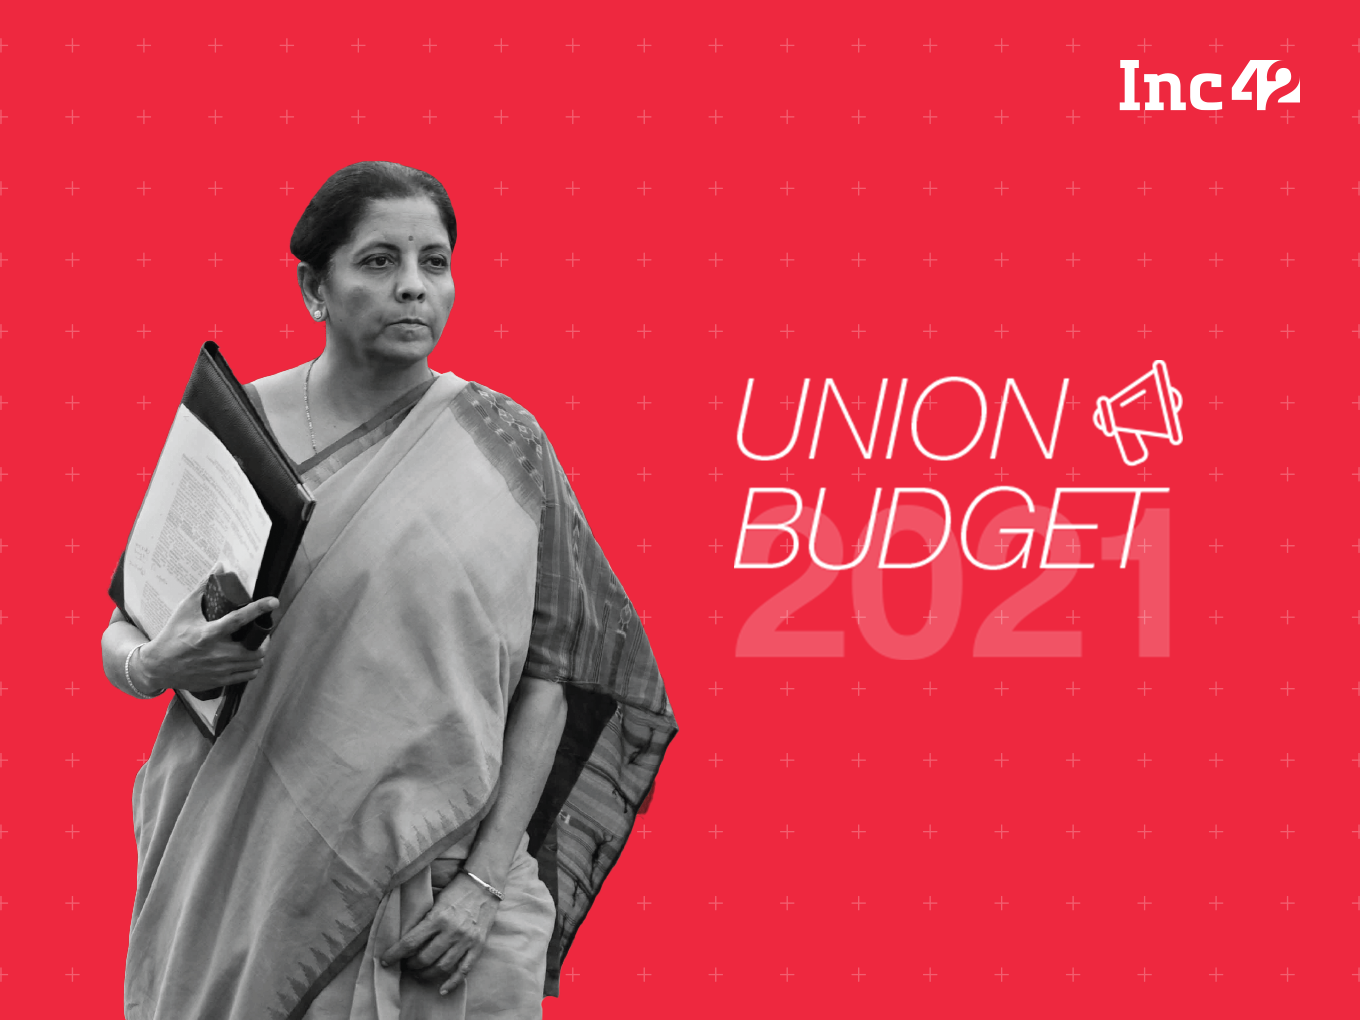 Union Budget 2021: NEP, Skilling To Get A Boost